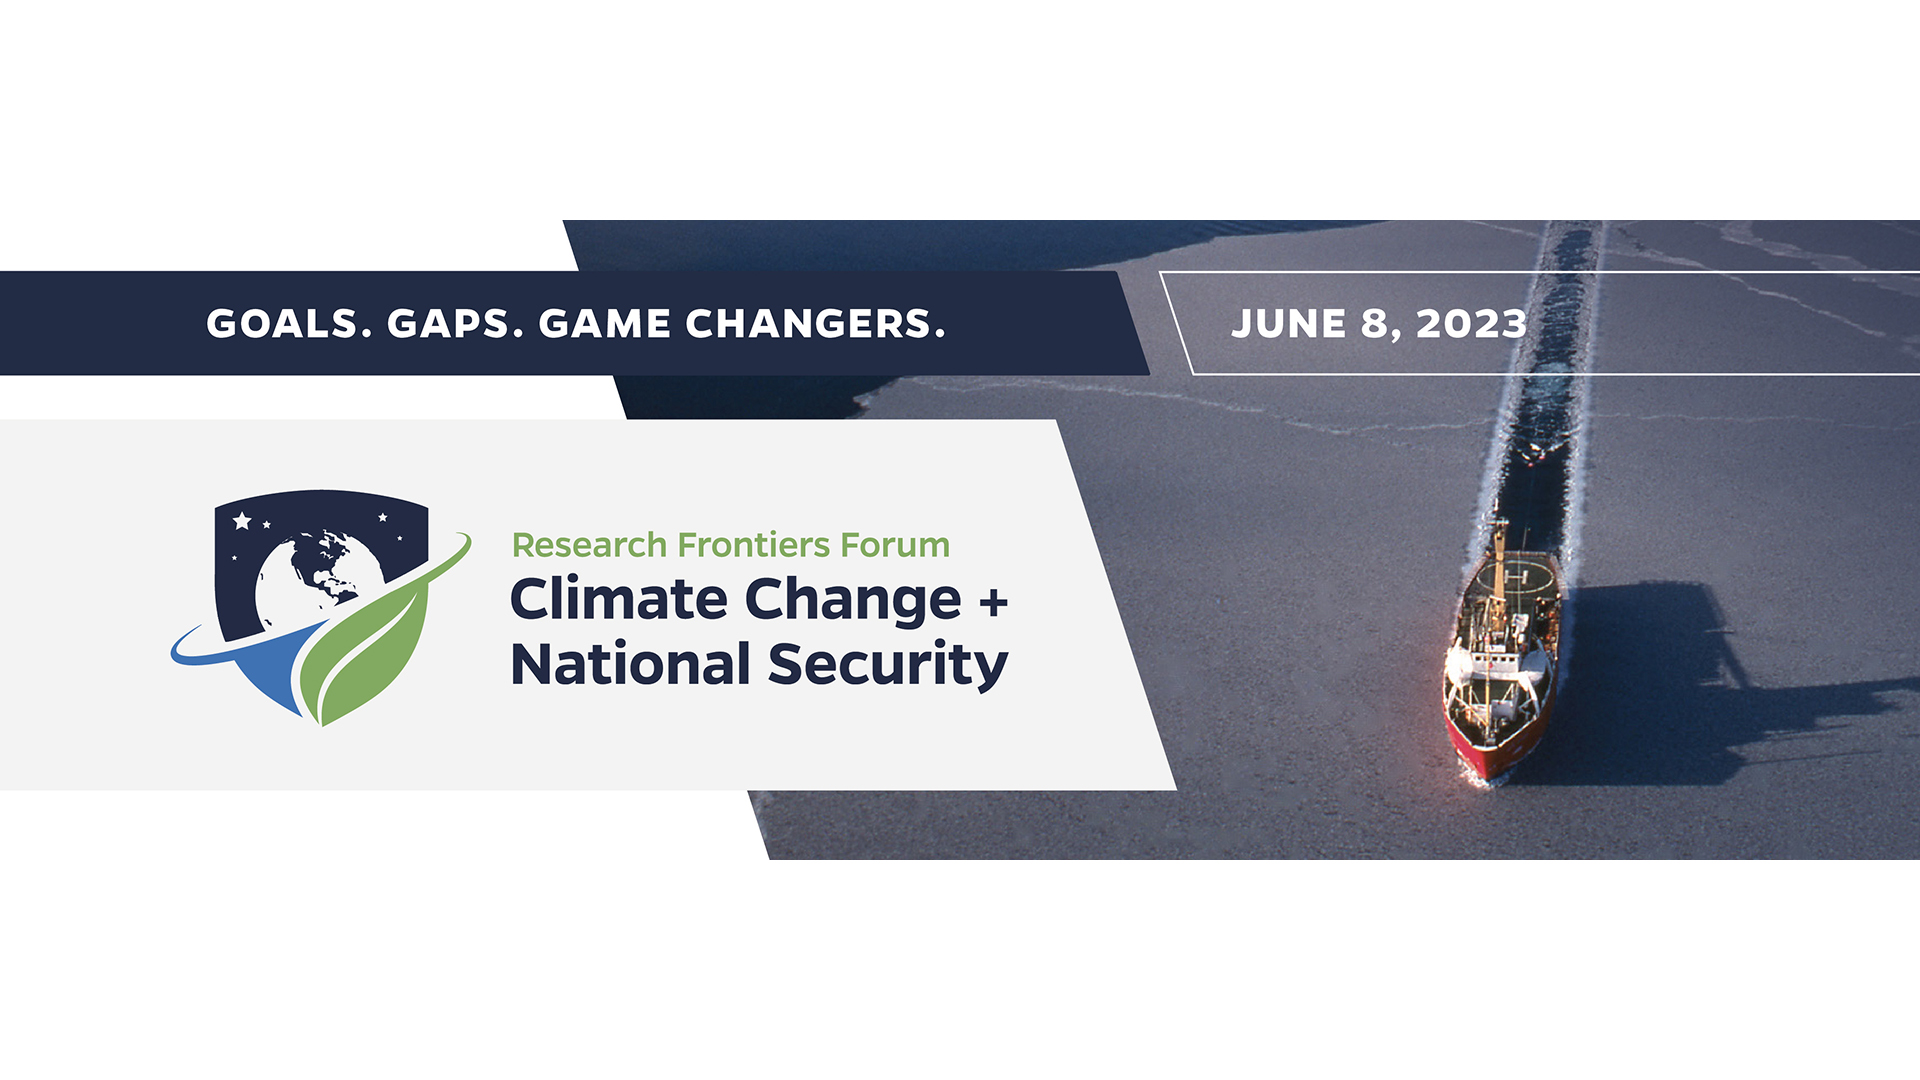 Research Frontiers Forum: Climate Change and National Security